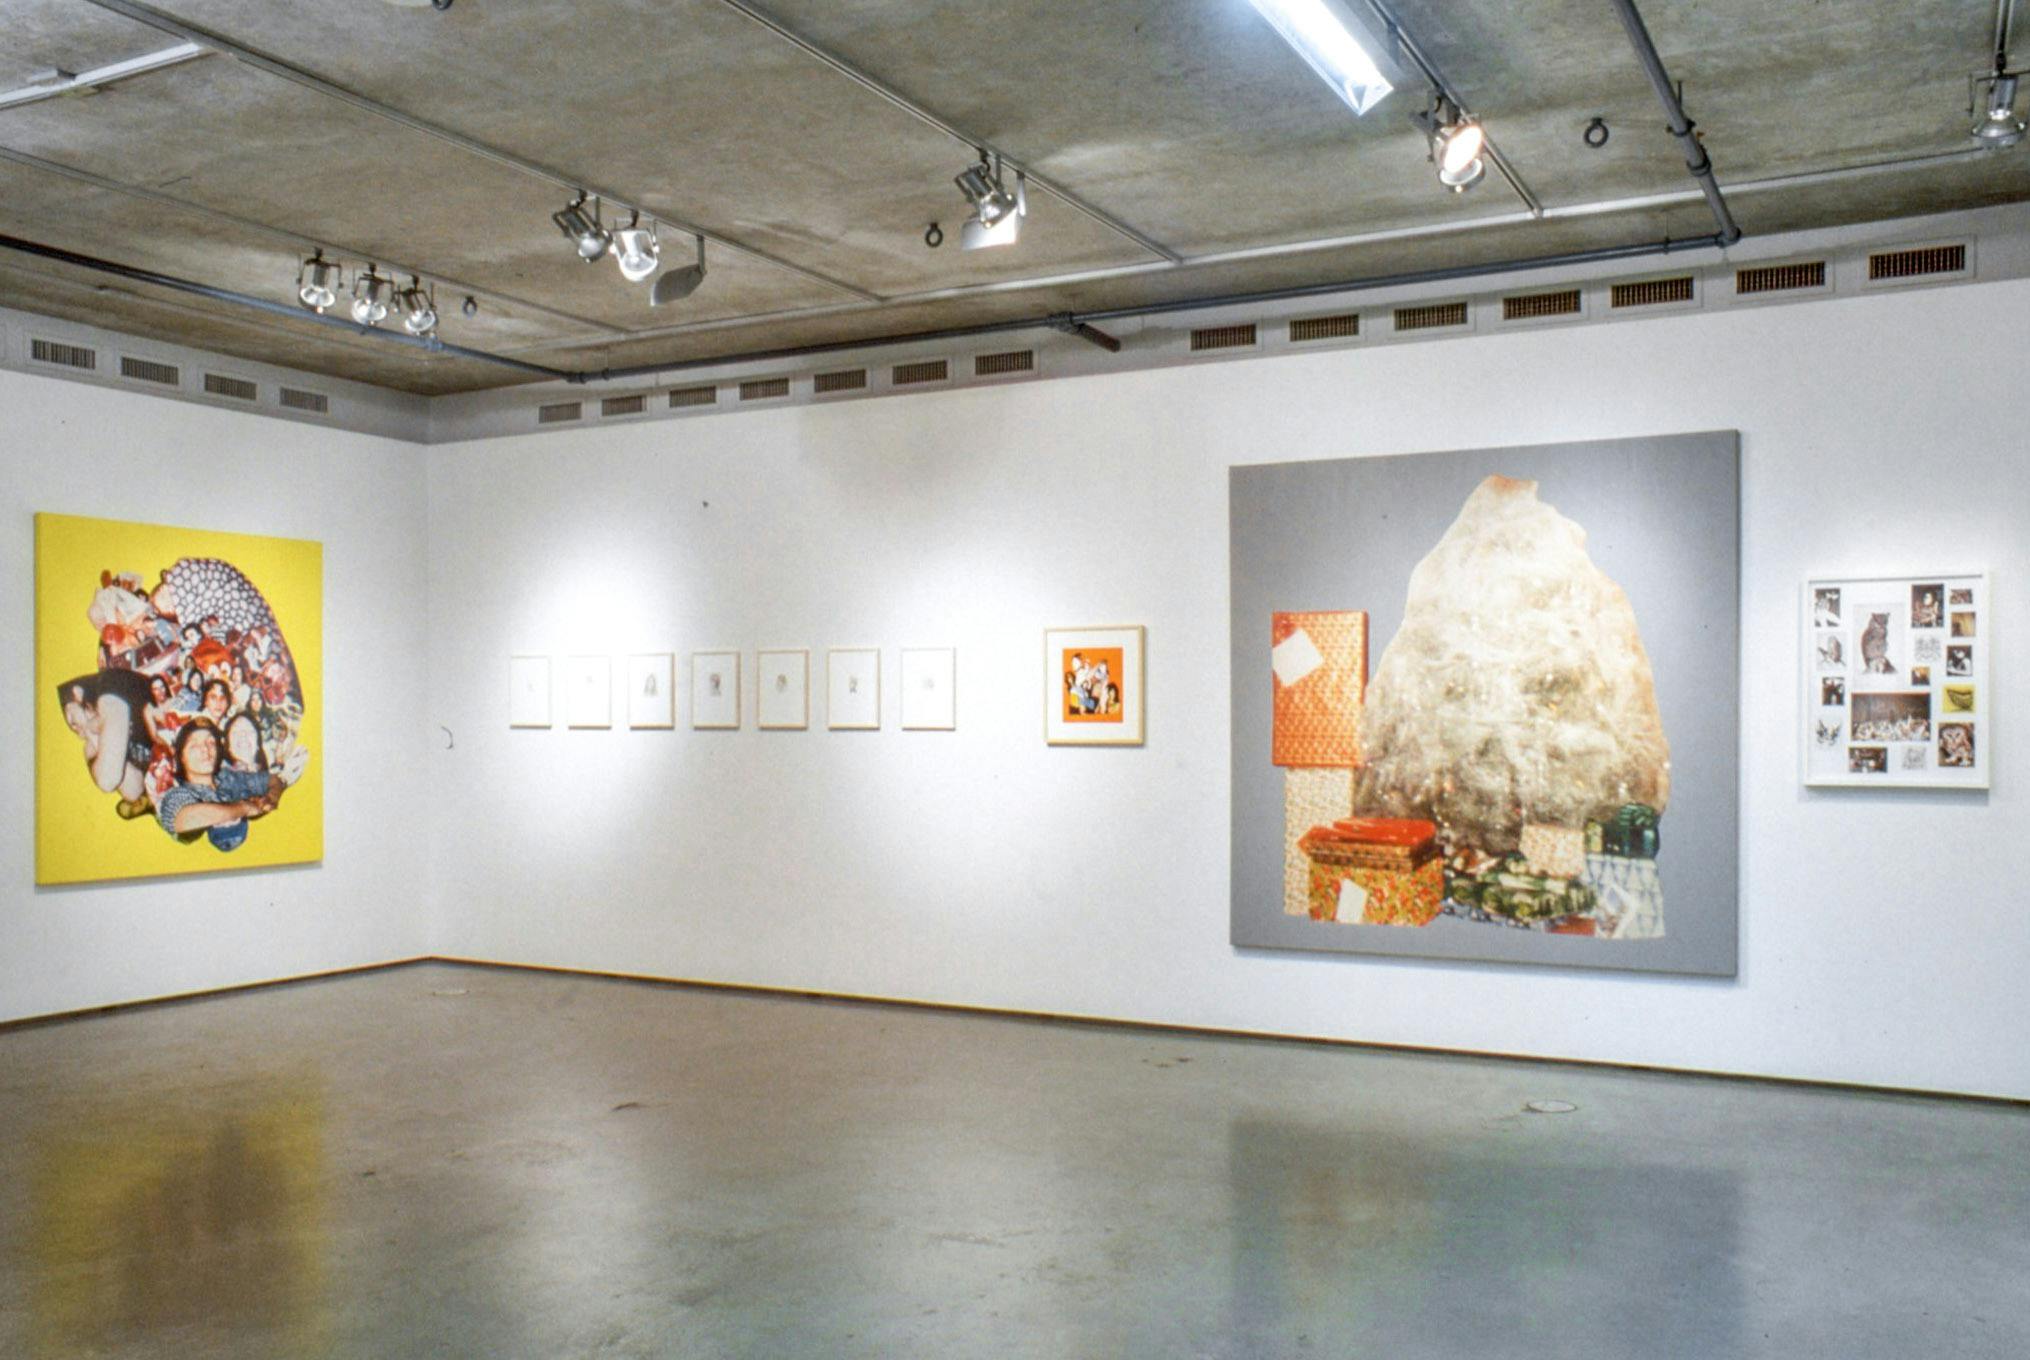 Installation image of works by Steven Shearer. Various-sized collage pieces and paintings are mounted on two walls. Among these works, there is a large-size collage work, which shows piles of wrapped gifts on a grey background. 